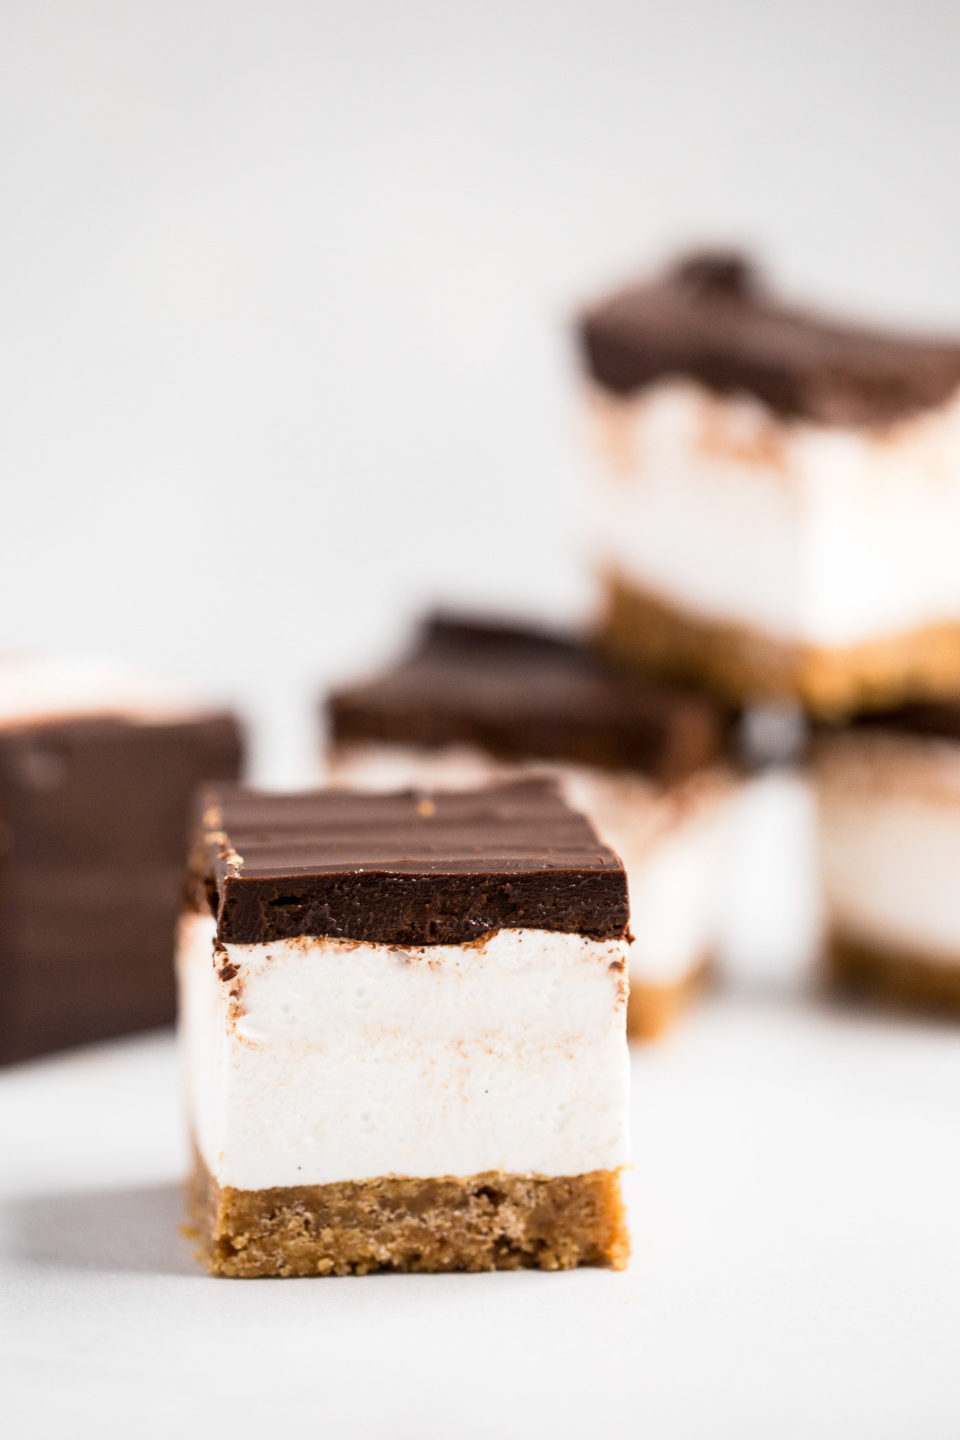 everyone’s childhood summer favorite gets a major update in this recipe for s’mores bars. these s’mores bars sandwich a thick layer of fluffy homemade vanilla bean marshmallow in between graham cracker crust & salted dark chocolate ganache. your favorite campfire treat will never be the same!